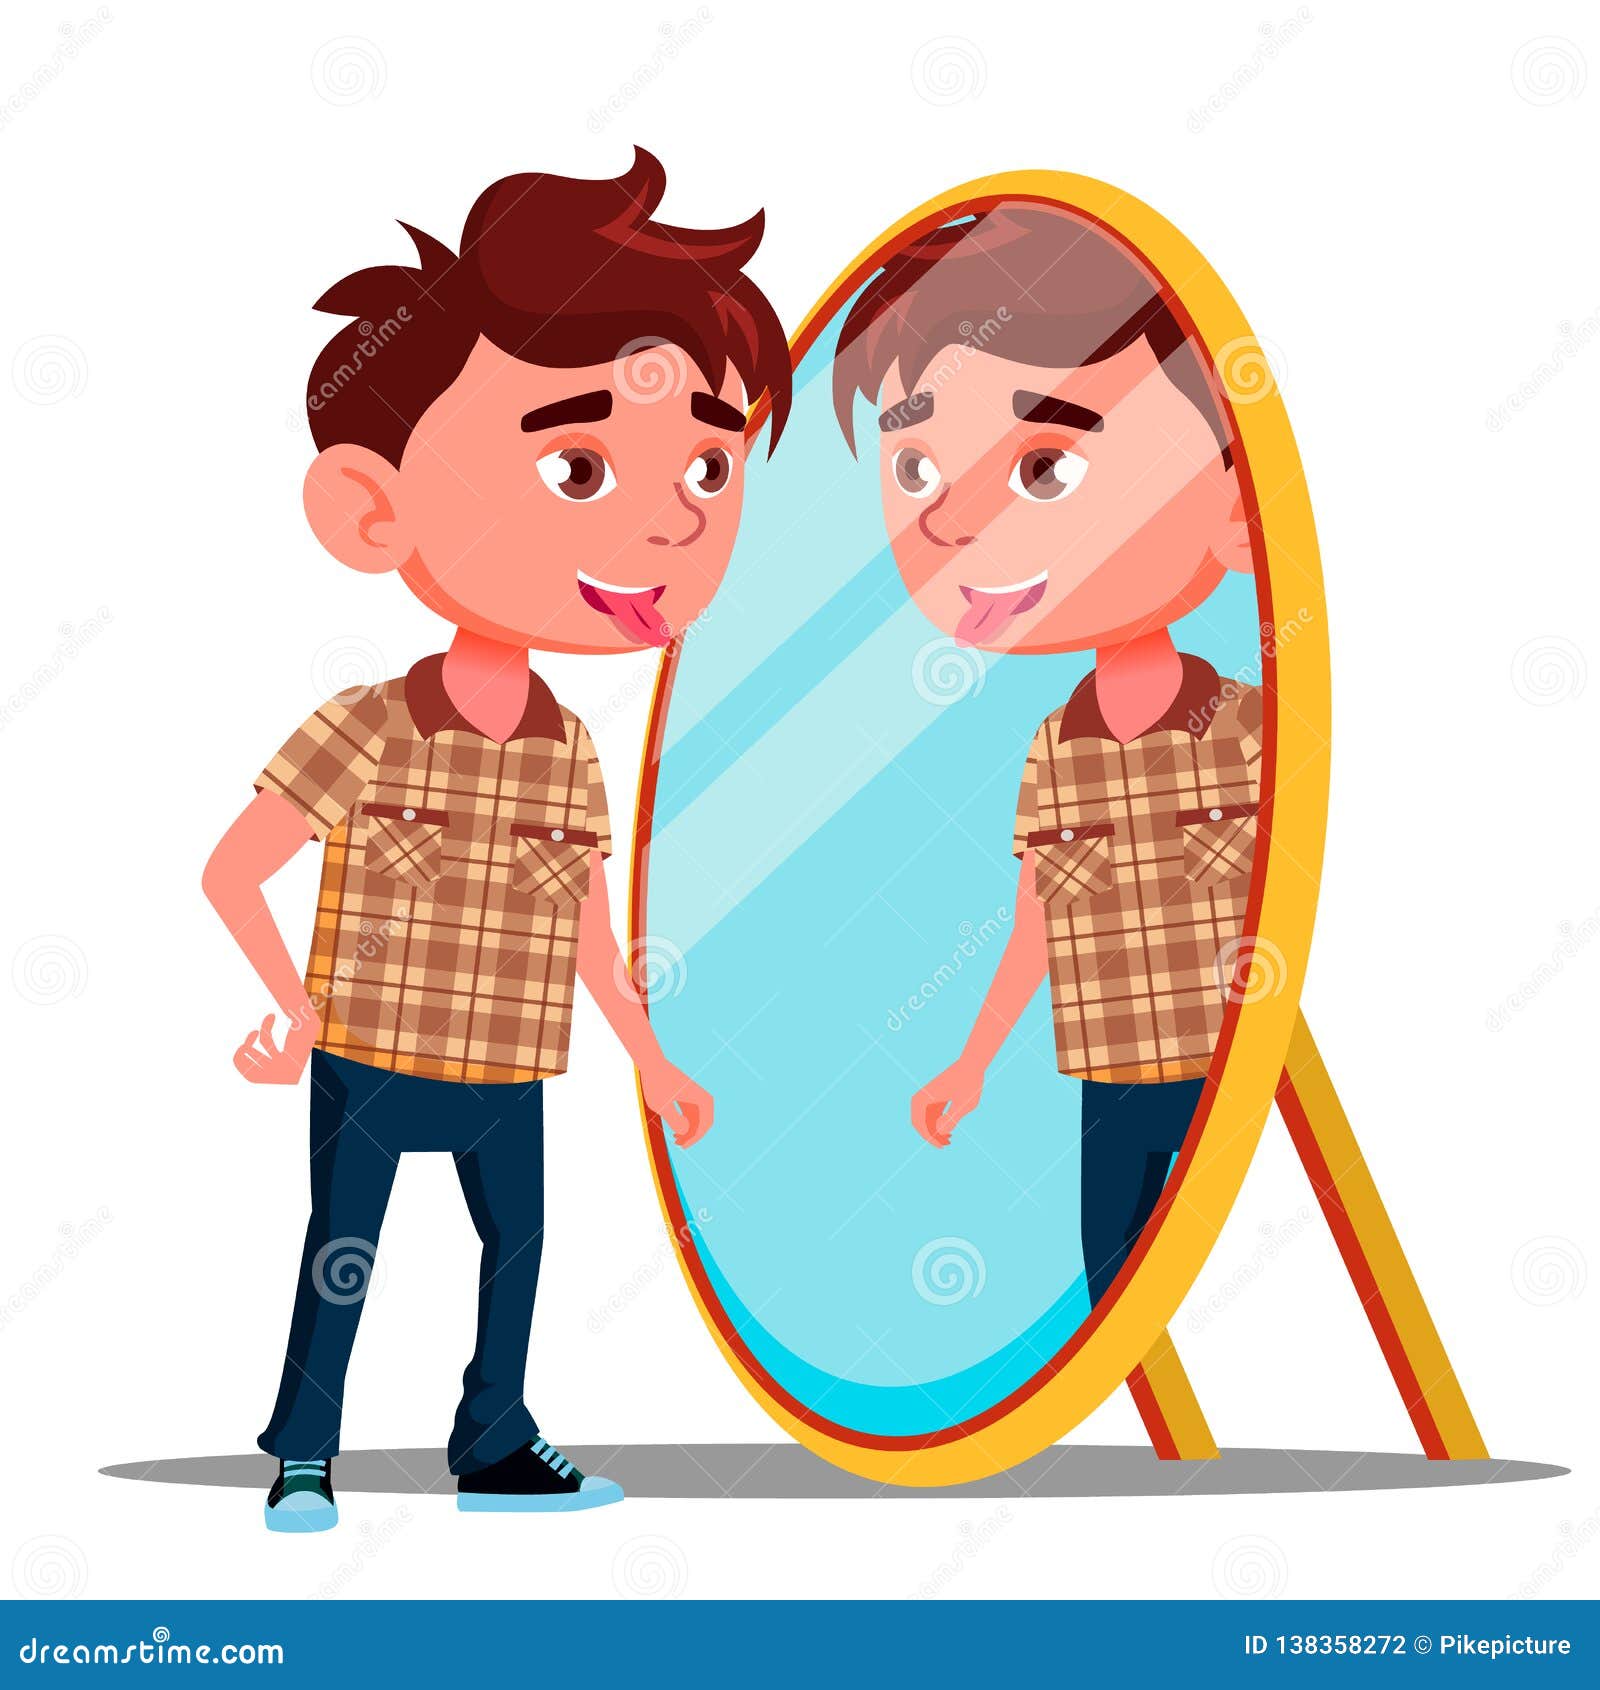 Child Mirror Reflection Stock Illustrations 262 Child Mirror Reflection Stock Illustrations Vectors Clipart Dreamstime